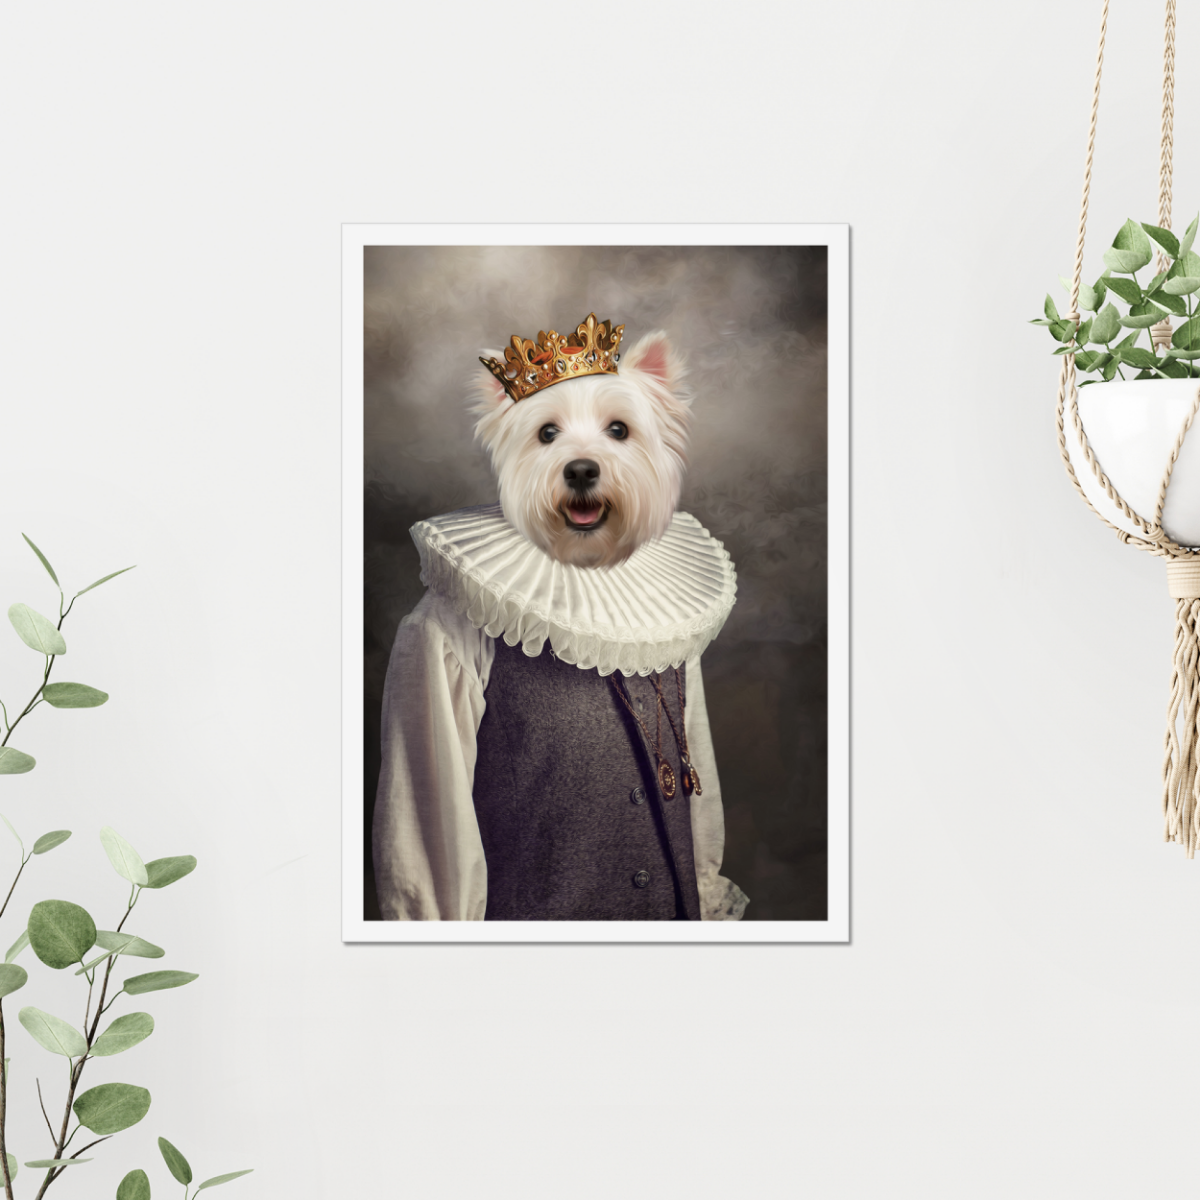 The Young Prince: Custom Pet Poster - Paw & Glory - #pet portraits# - #dog portraits# - #pet portraits uk#Paw & Glory, pawandglory, pet portraits in oils, dog drawing from photo, professional pet photos, custom pet paintings, pictures for pets, dog portrait painting, pet portrait